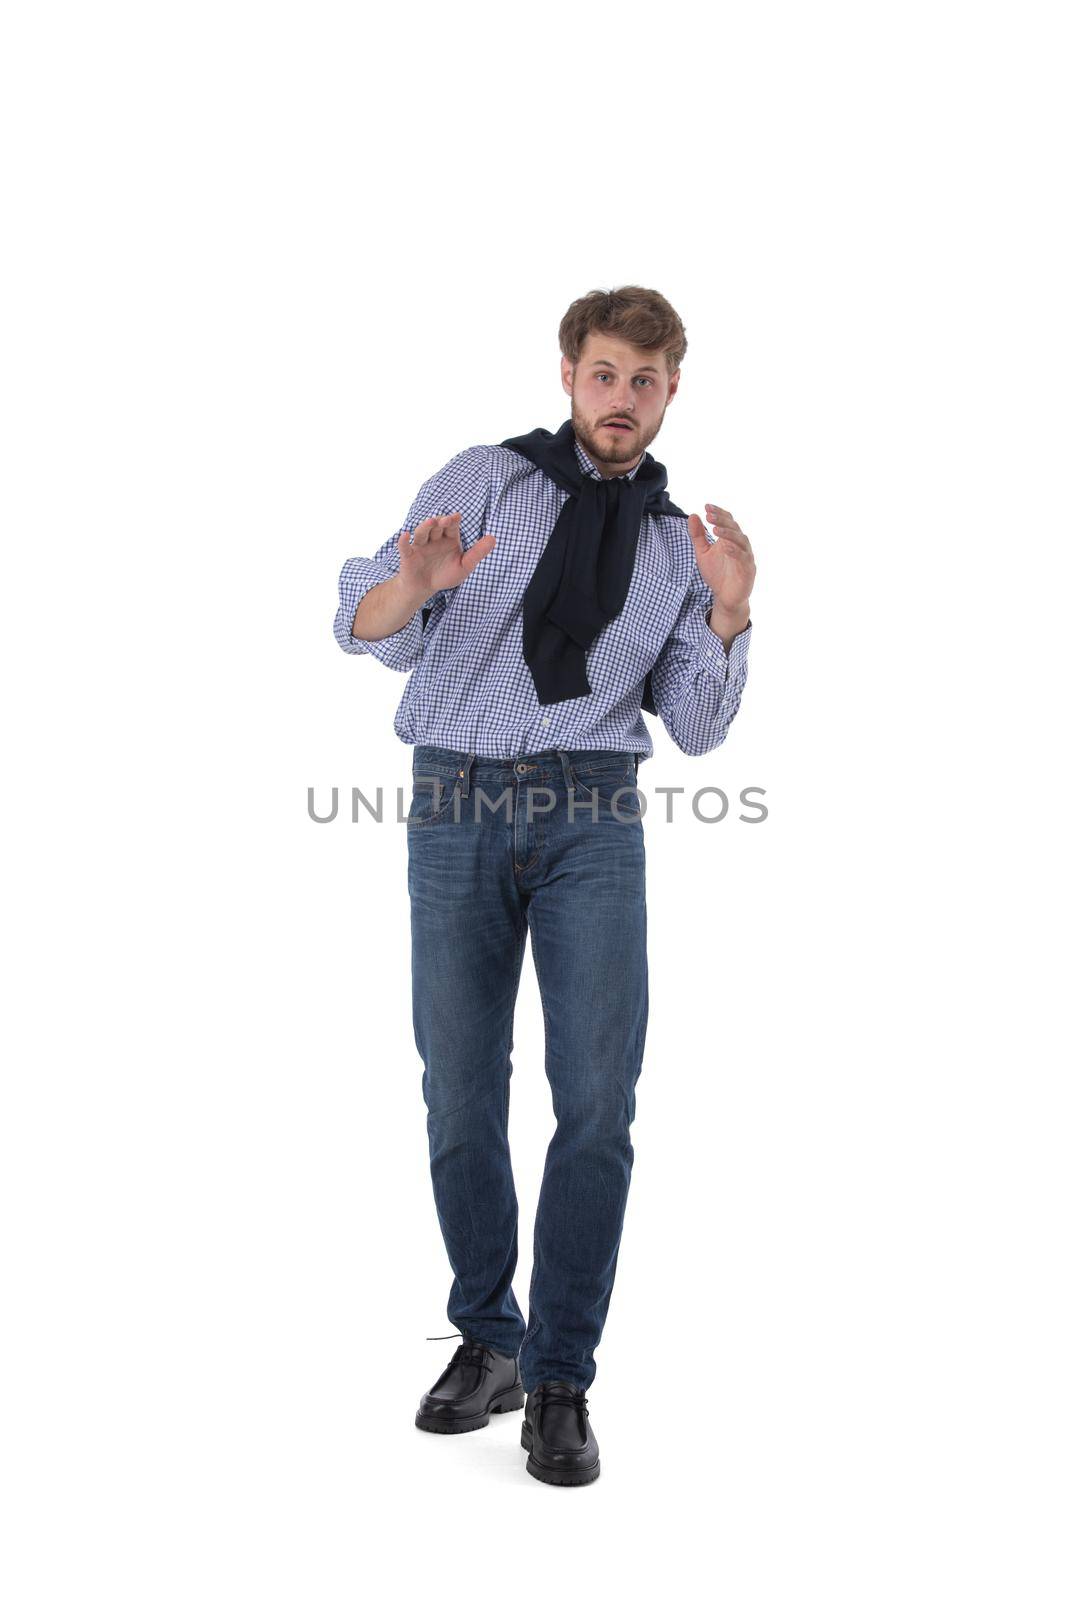 Full length portrait of frightened man stood with a frightened look on his face. Isolated on white background